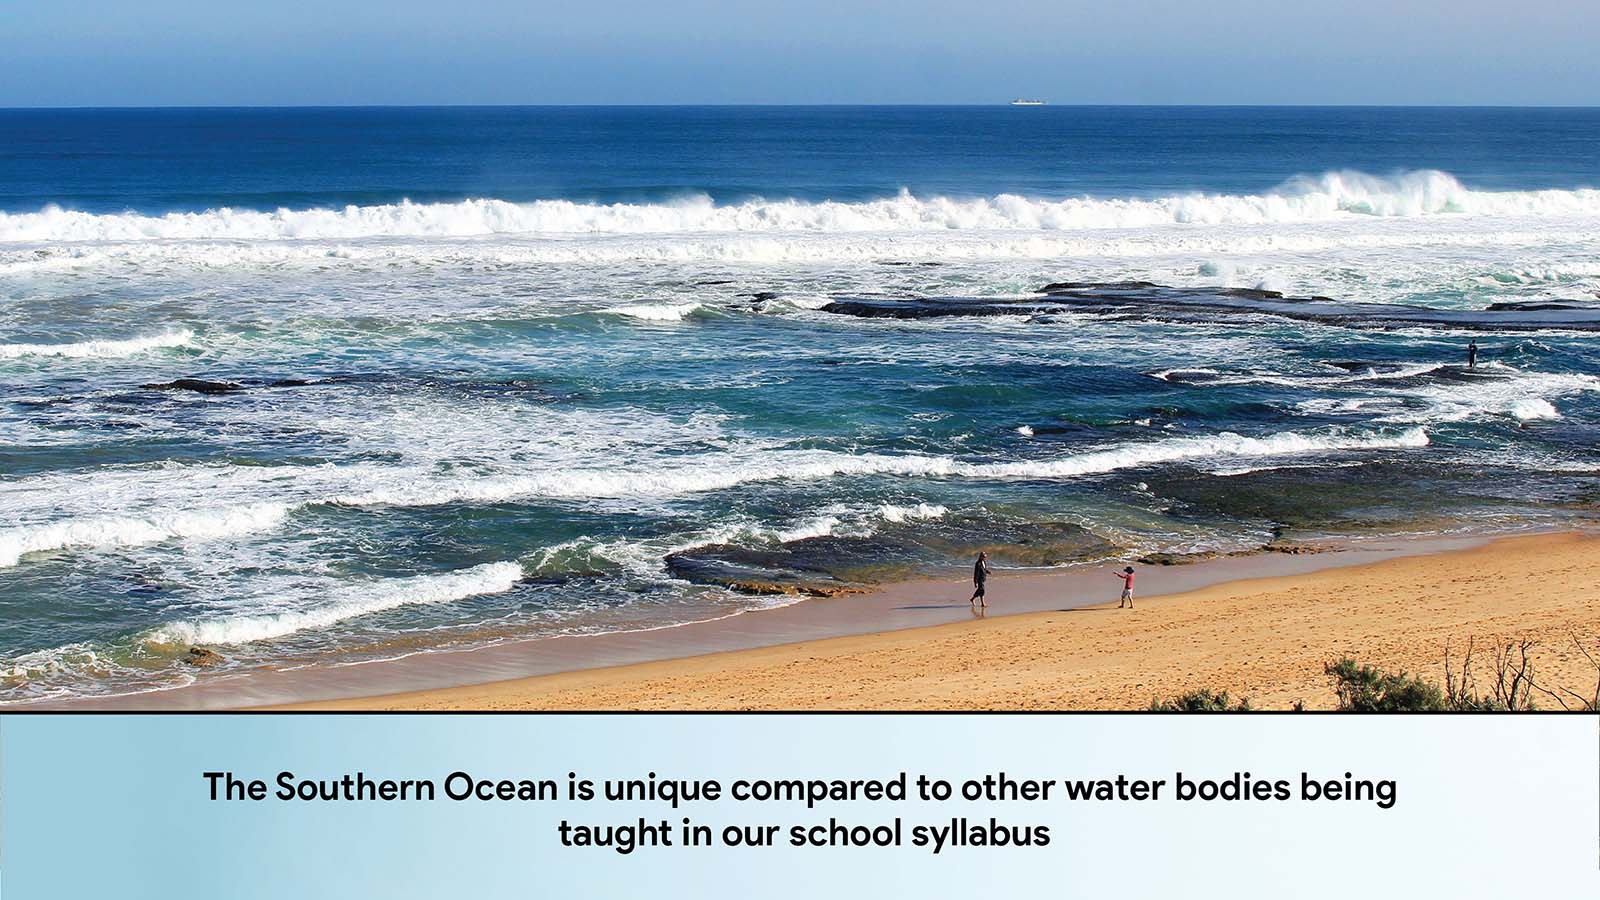 The Southern Ocean is unique compared to other water bodies being taught in our school syllabus